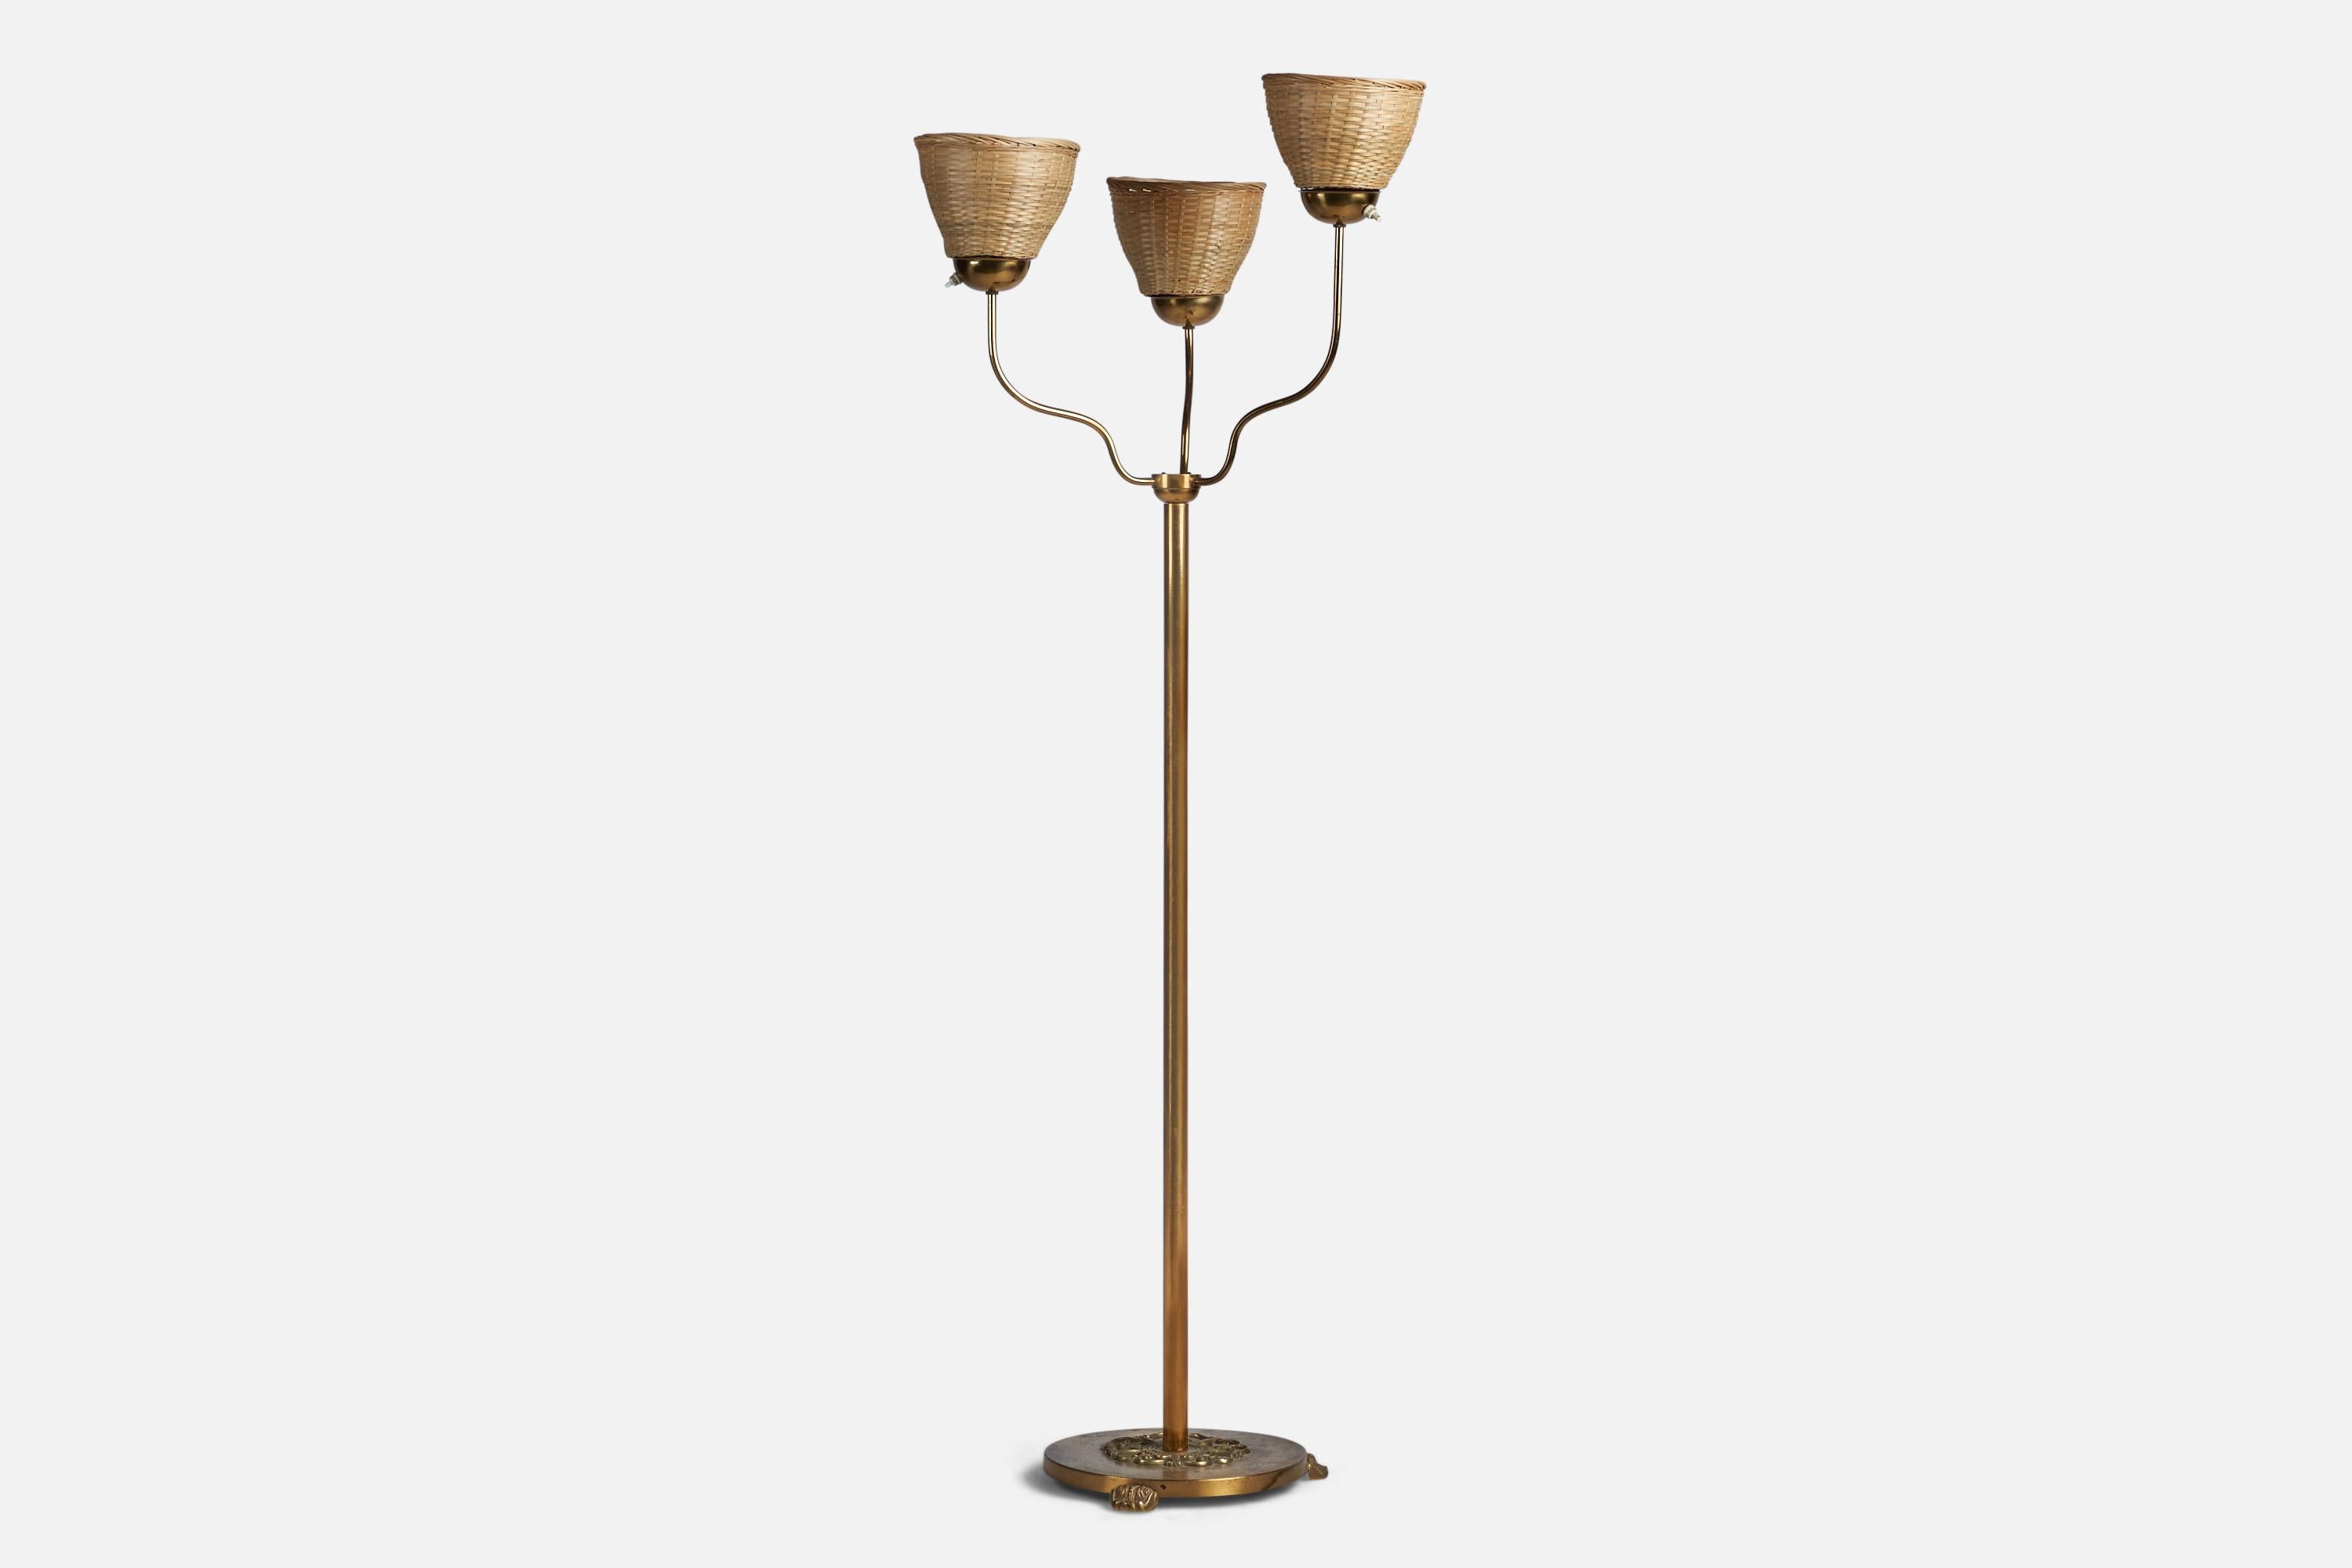 A three-armed brass and rattan floor lamp designed and produced in Sweden, c. 1930s.

Overall Dimensions (inches): 61.25” H x 22” Diameter
Bulb Specifications: E-26 Bulb
Number of Sockets: 3
All lighting will be converted for US usage. We are unable